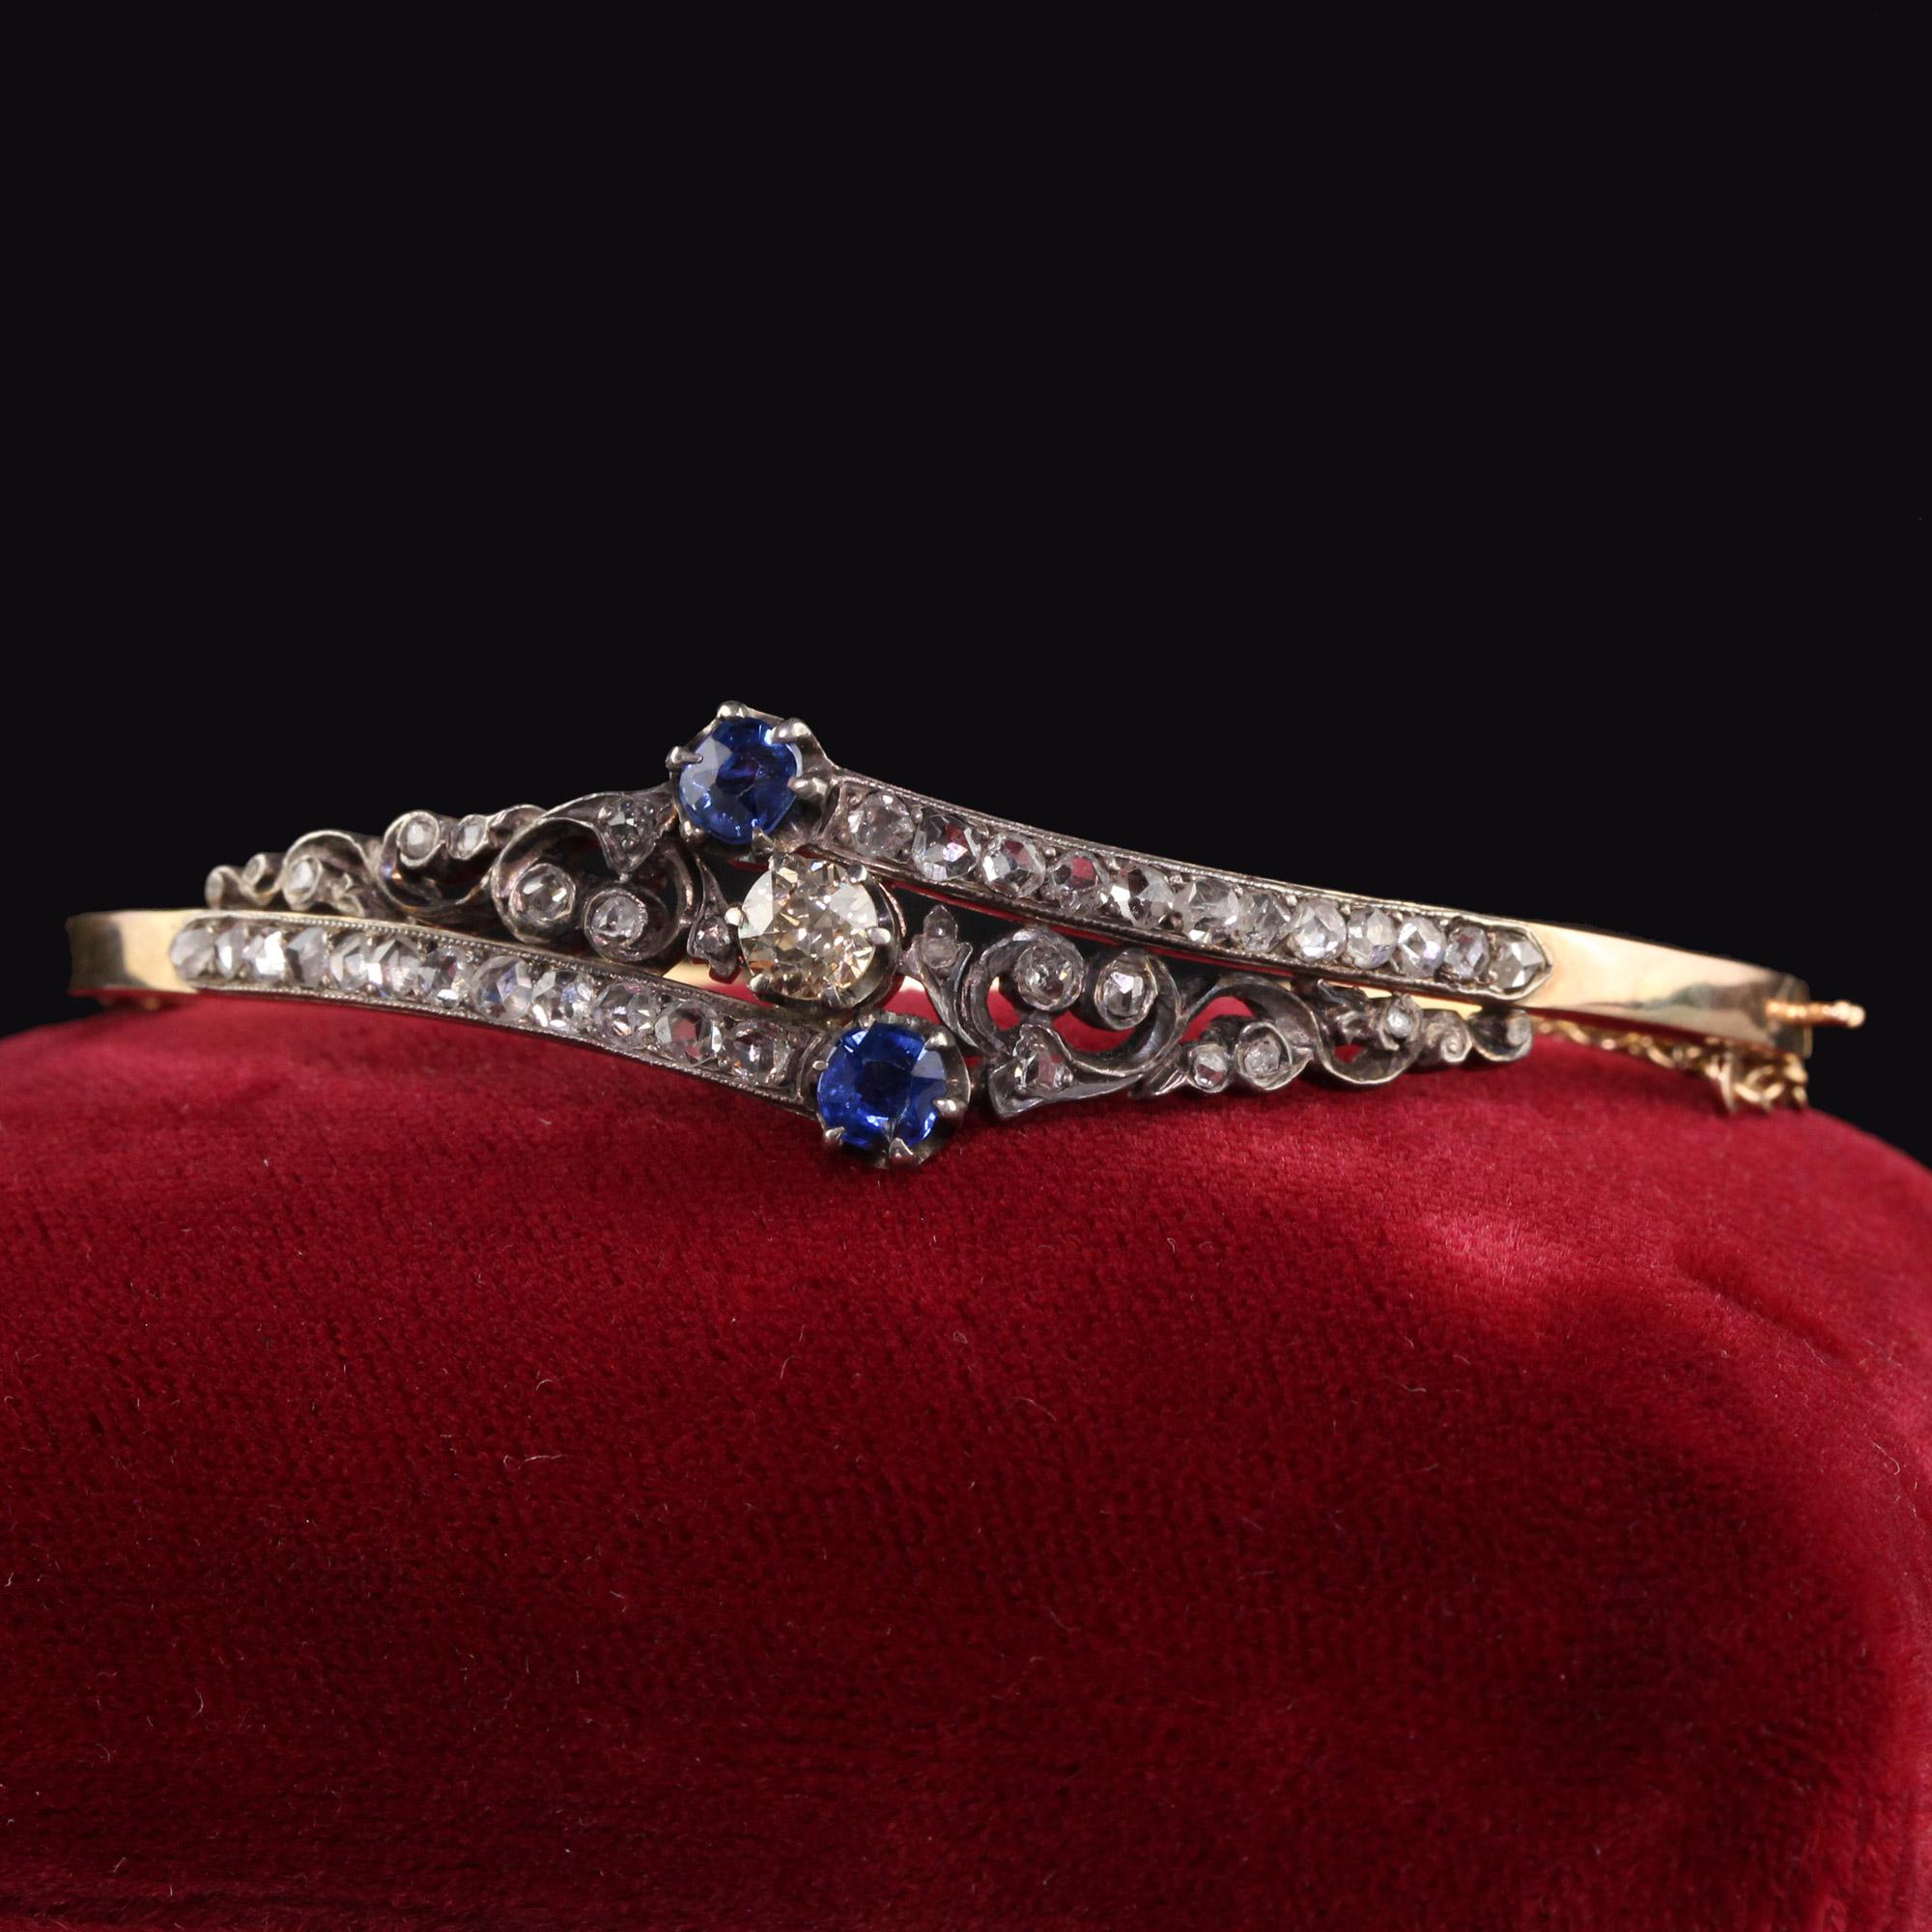 Beautiful Antique Victorian 14K Yellow Gold Rose Cut Diamond and Sapphire Bangle Bracelet. This gorgeous bangle bracelet is crafted in 14k yellow gold and silver top. There are chunky rose cut diamonds all over the bangle with a champagne old euro